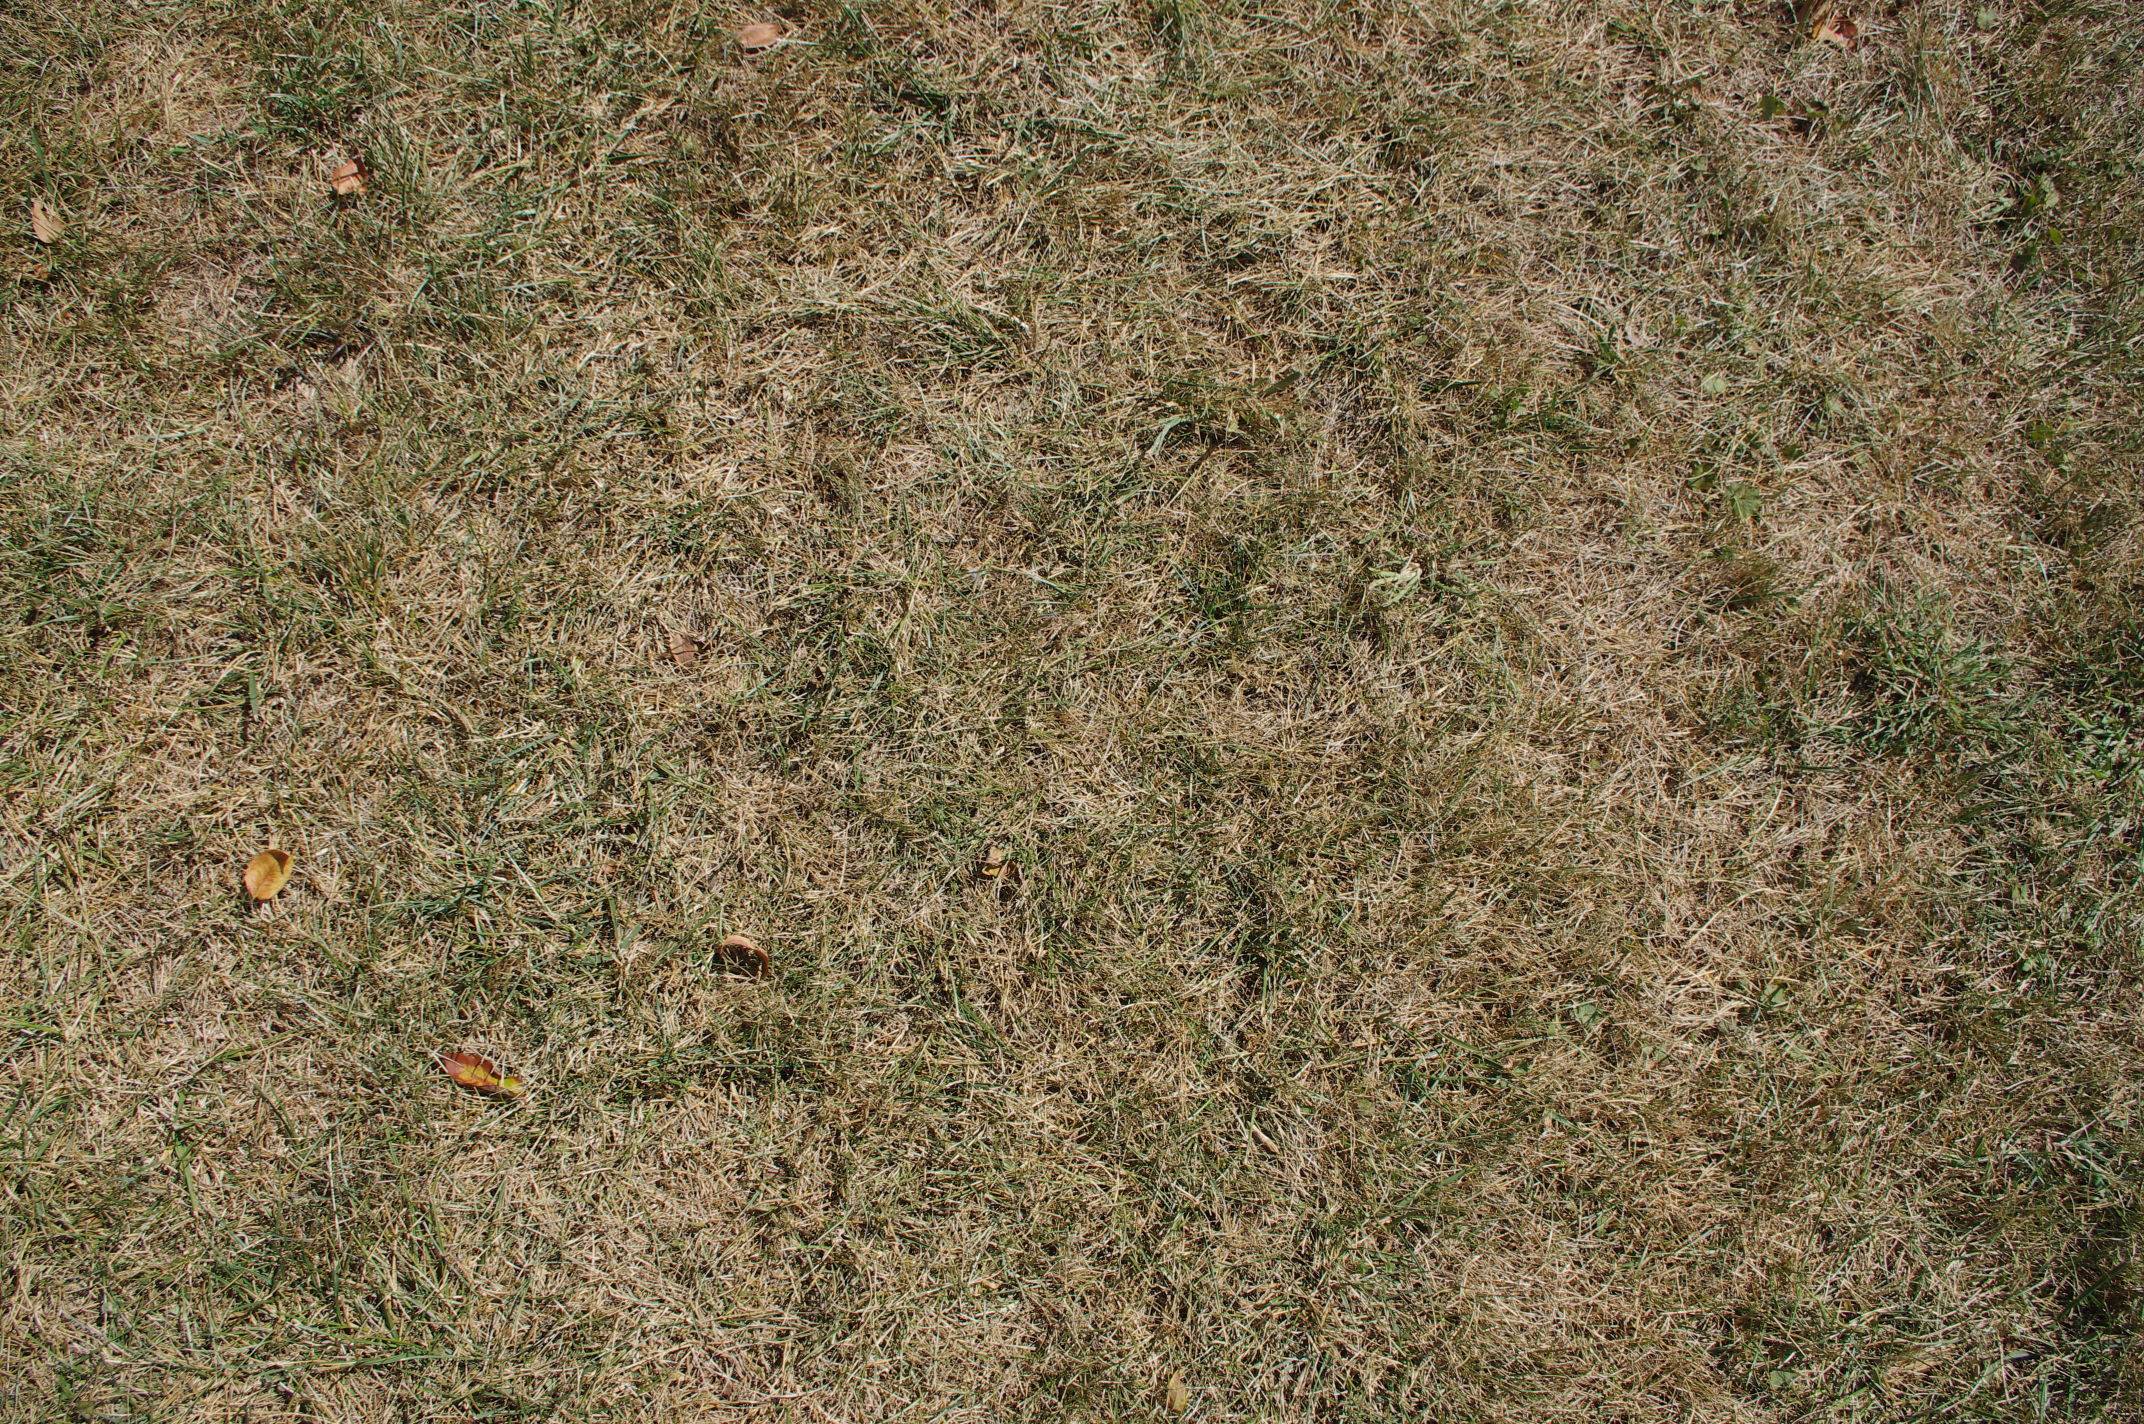 45 high-res ground texture photos - IMGP0911.JPG | Liberated Pixel Cup